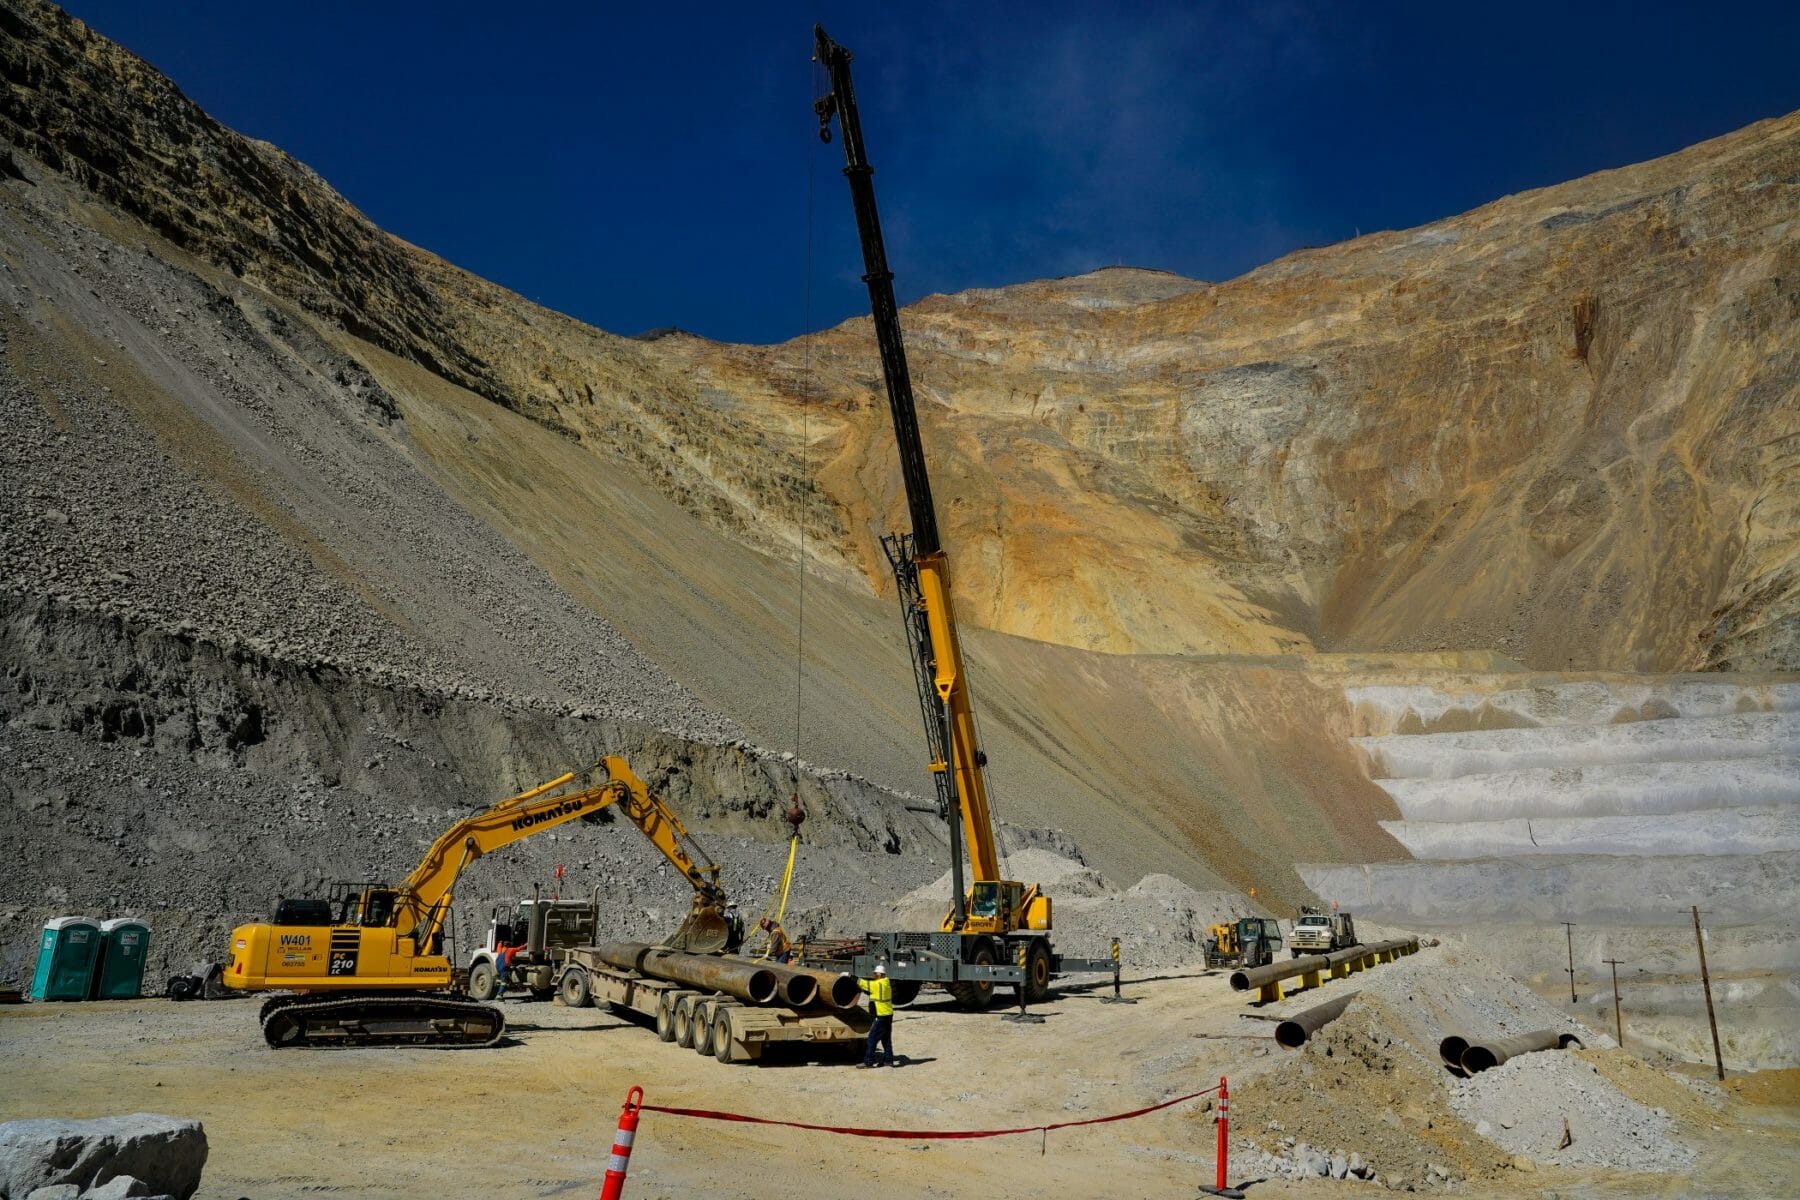 Industrial process piping installation | Pipe Laying | Utah mining construction | Wollam Construction